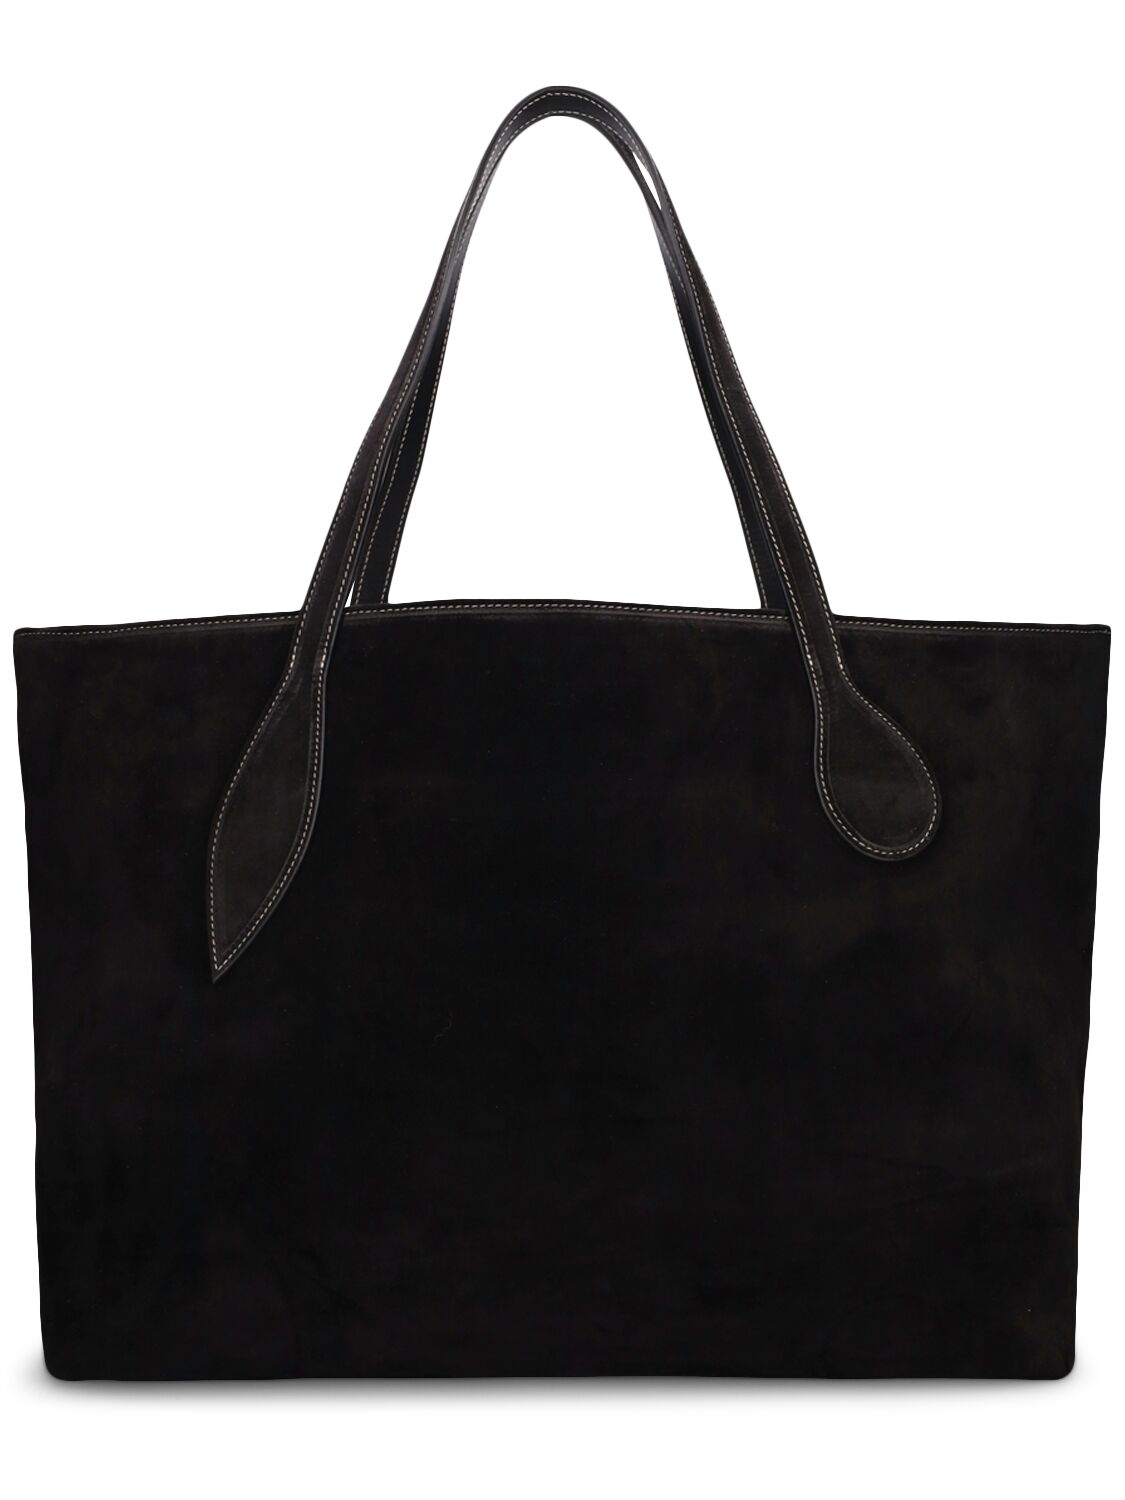 Image of Mega Sprout Suede Tote Bag